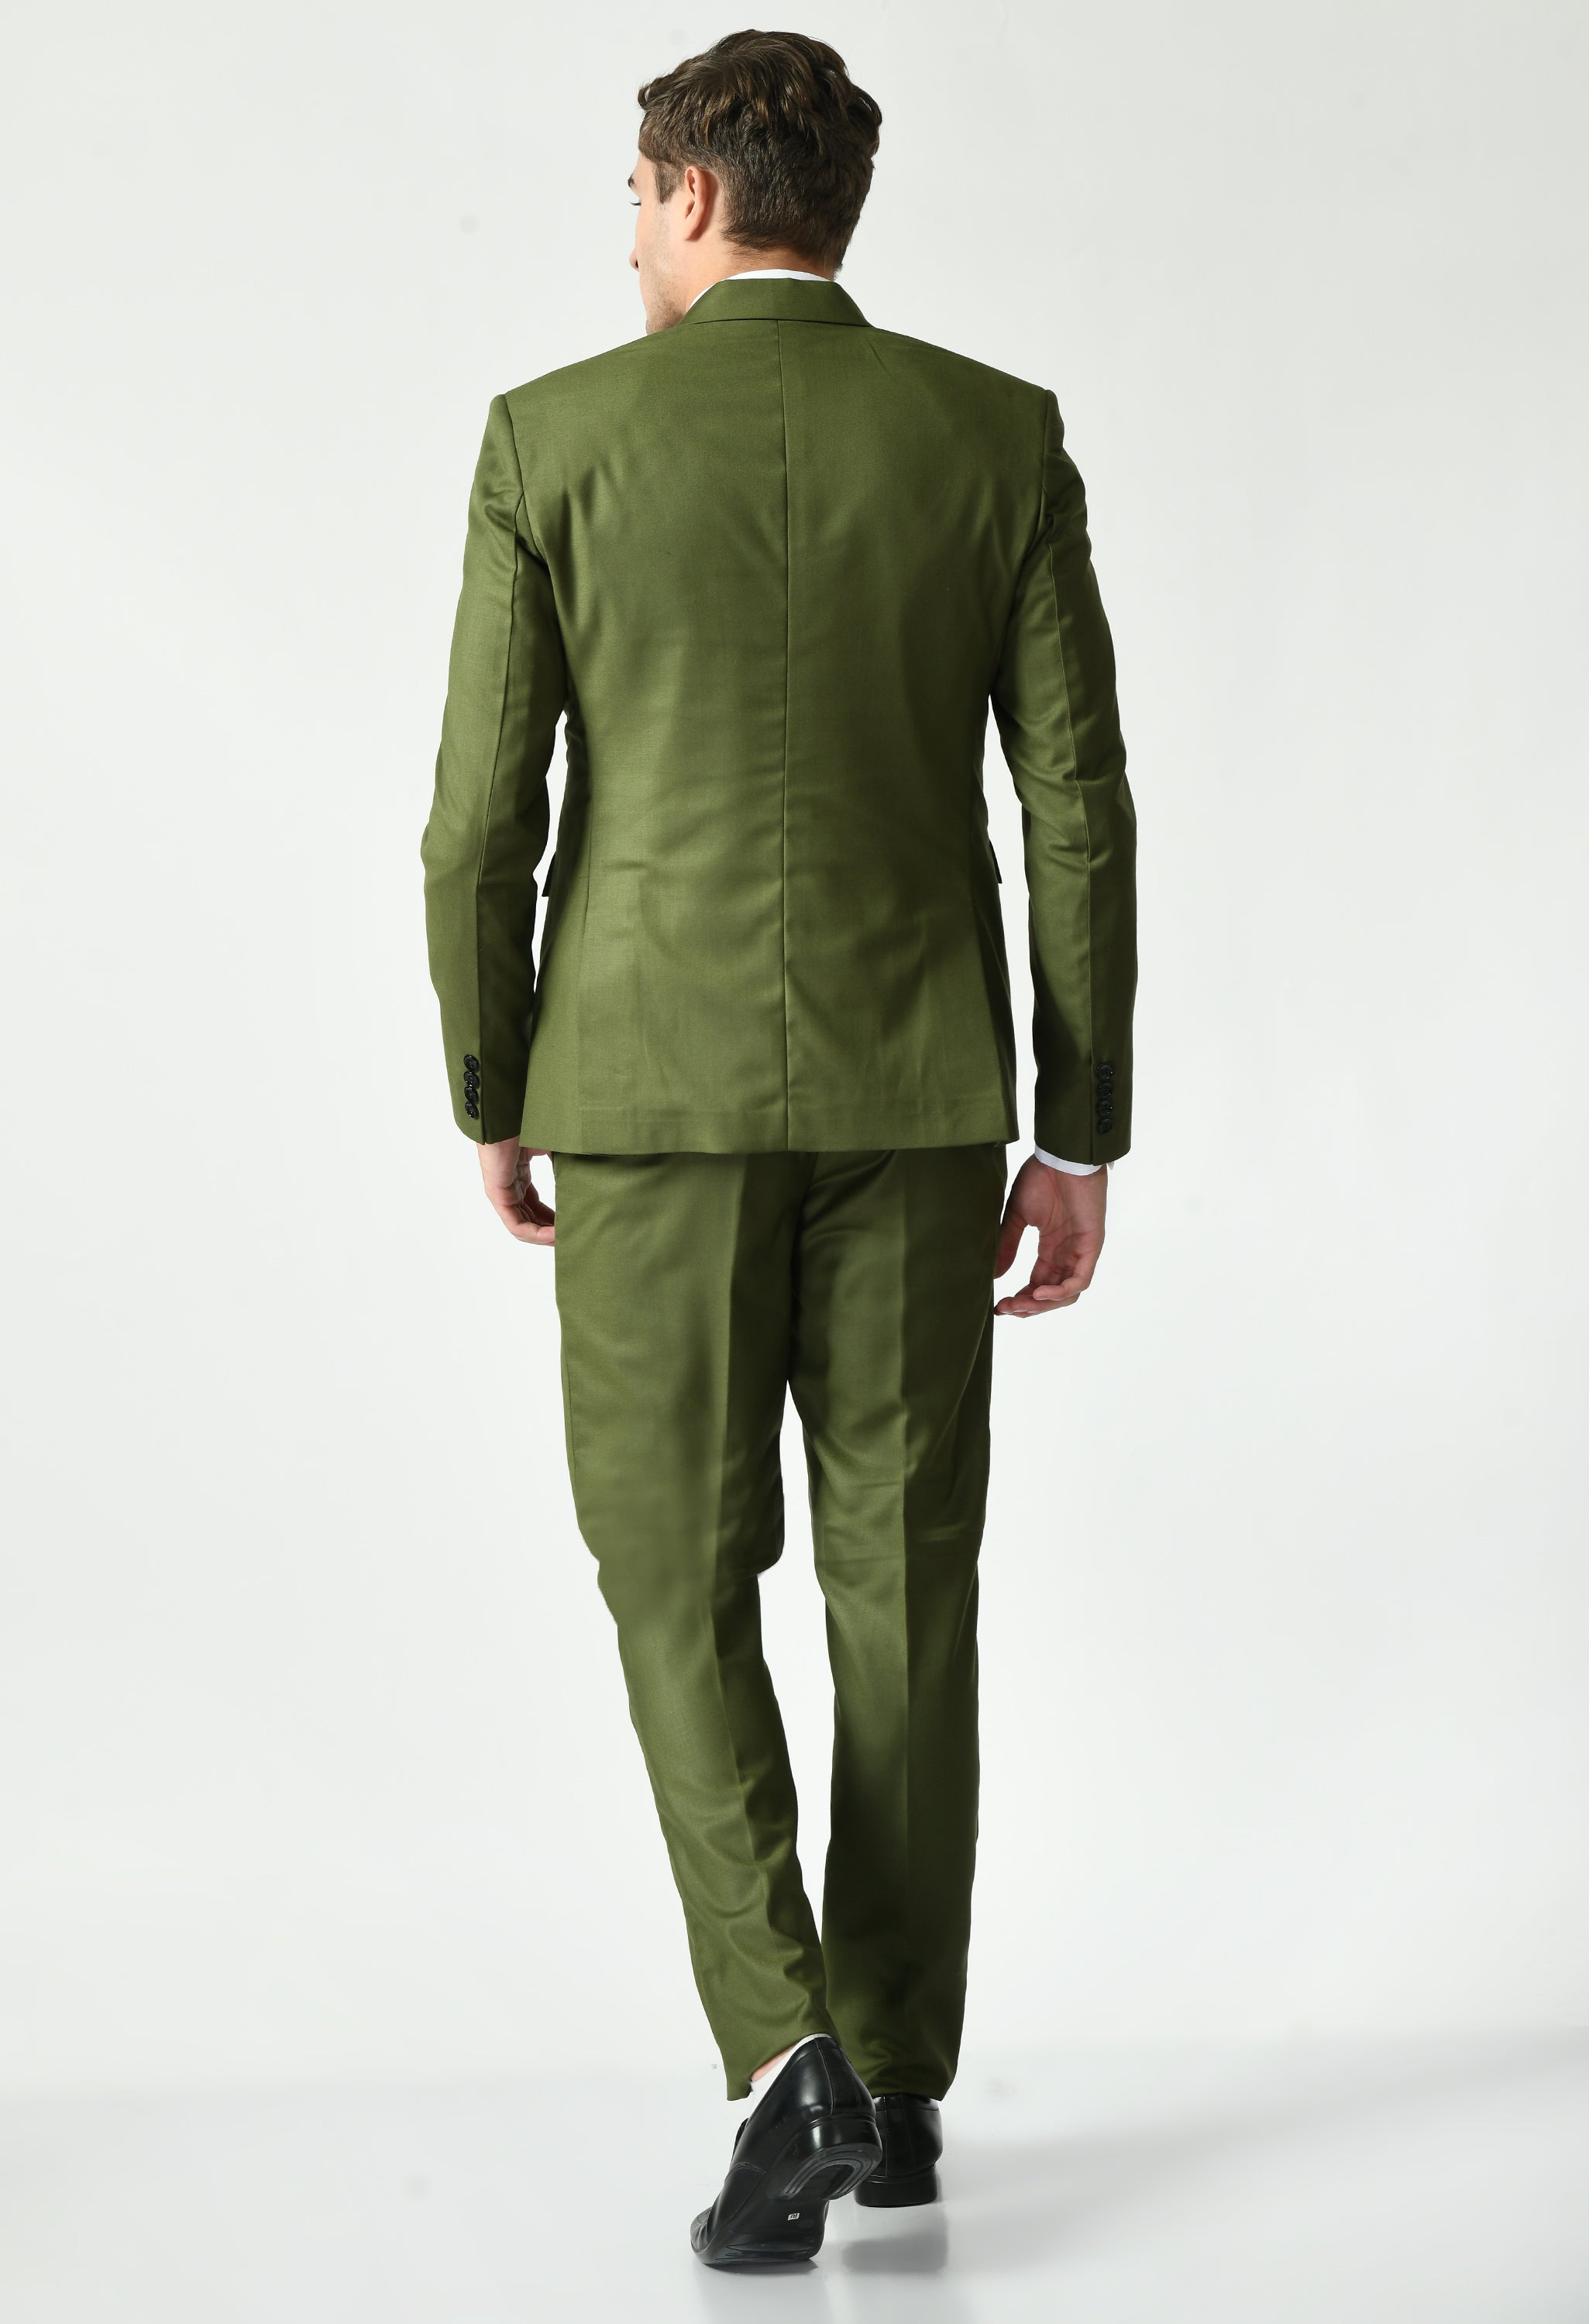 Tailored Green Slim Fit Suit Set - SQUIREHOOD